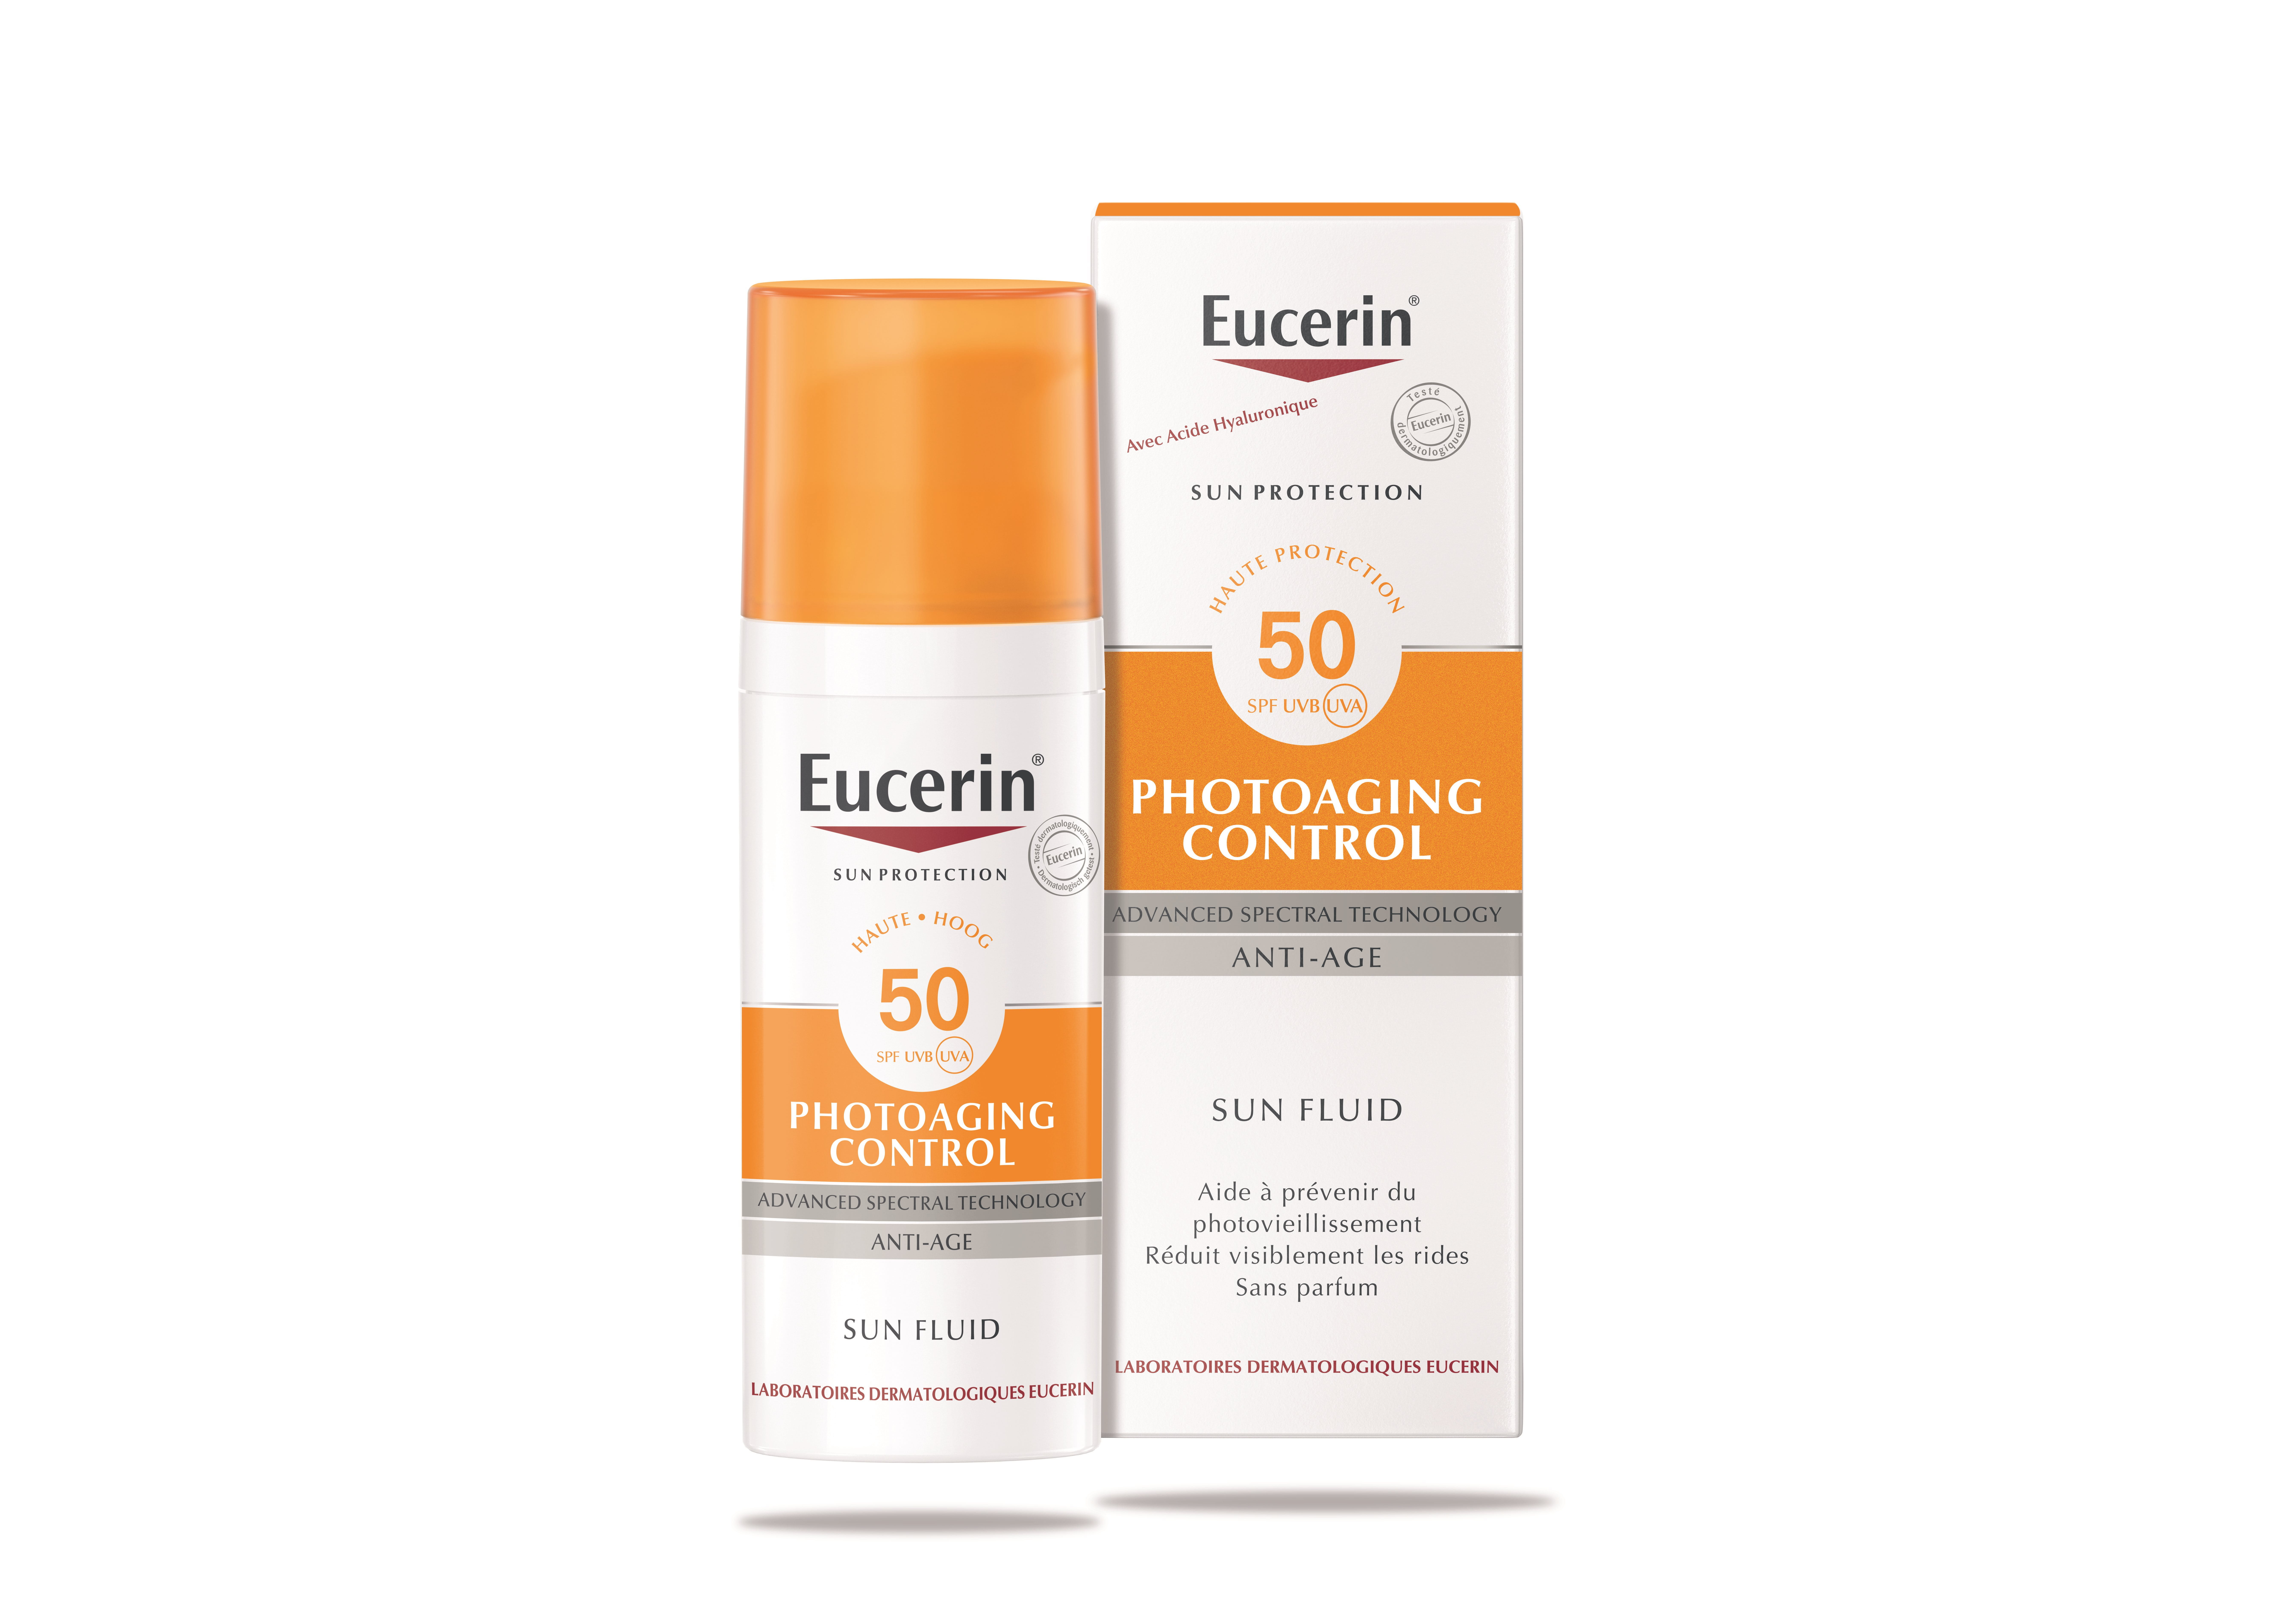 Sun protection with Hyaluronic Acid